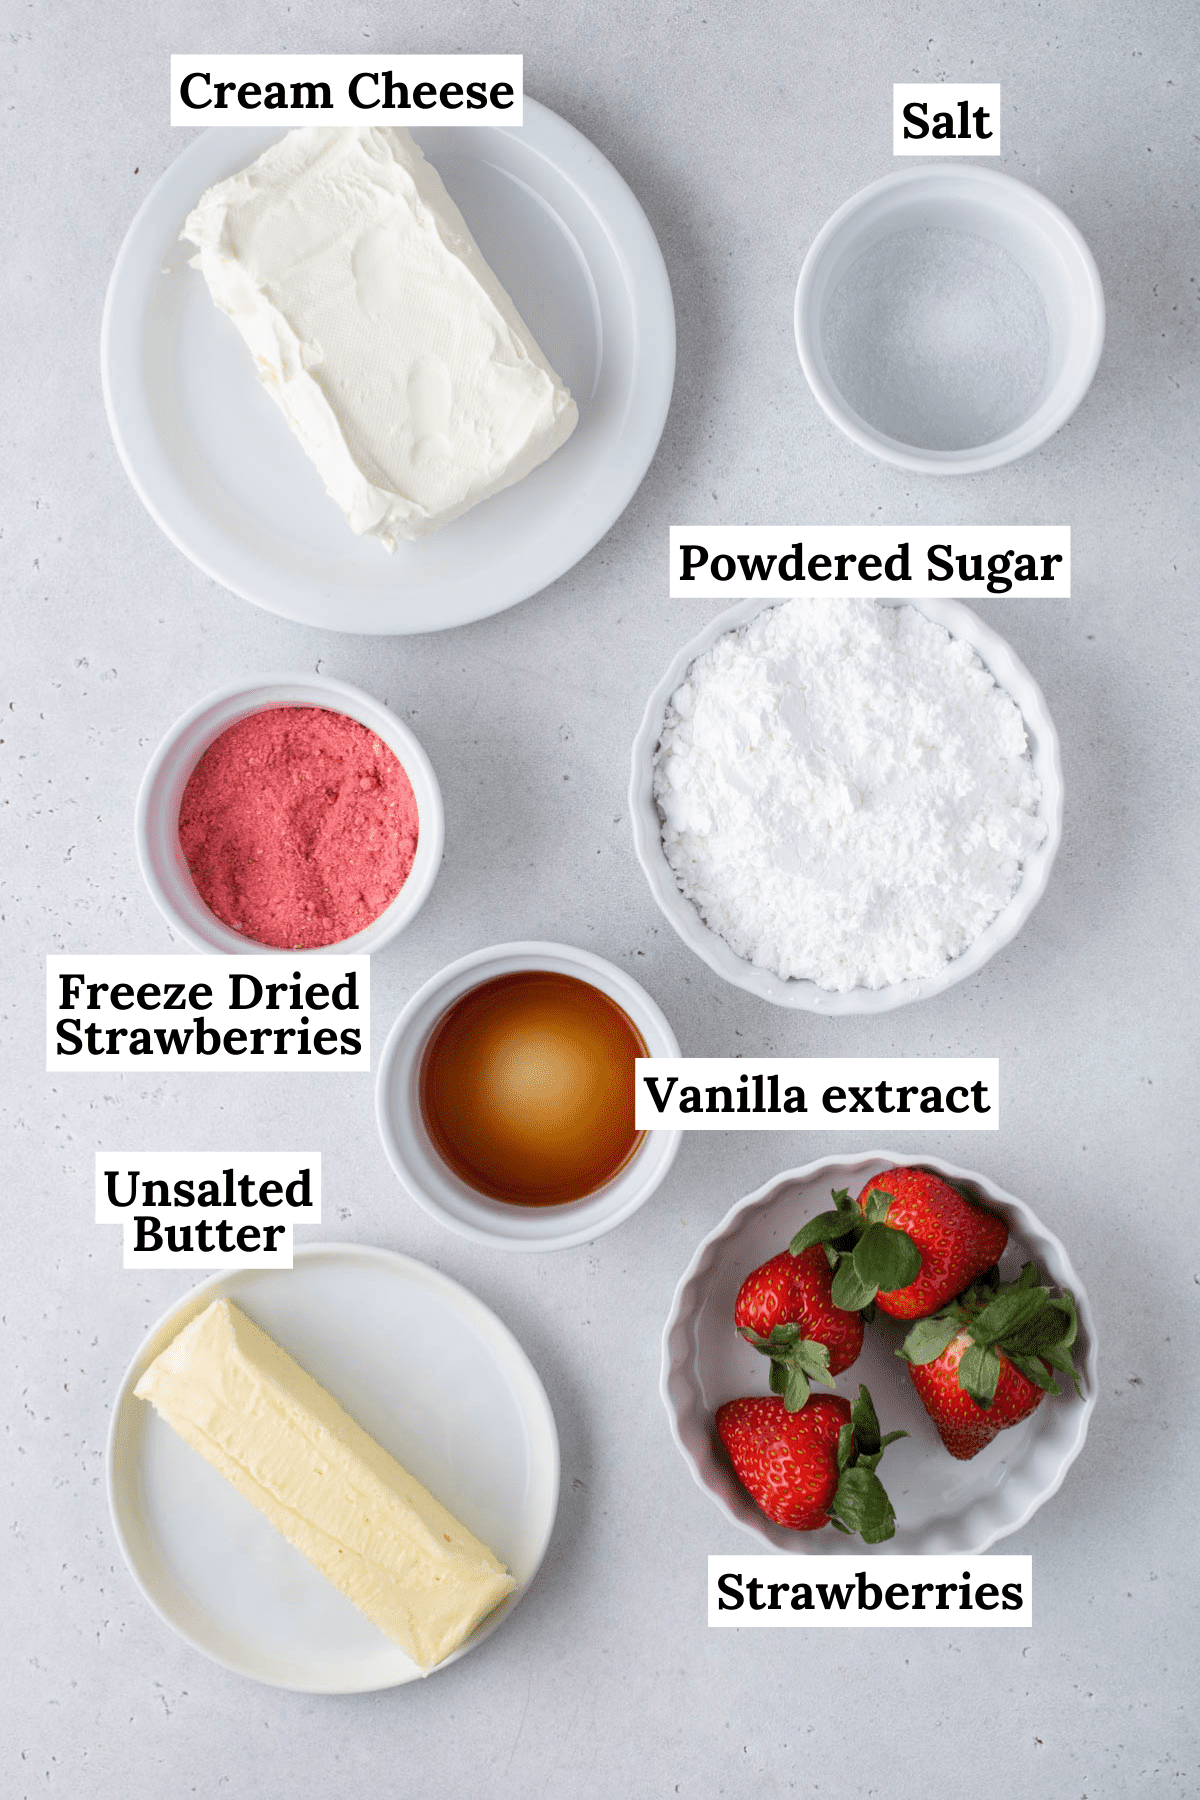 ingredients for strawberry cream cheese frosting in separate white bowls including a stick of butter, fresh strawberries, vanilla extract, powdered sugar, ground freeze fried strawberries, cream cheese and salt